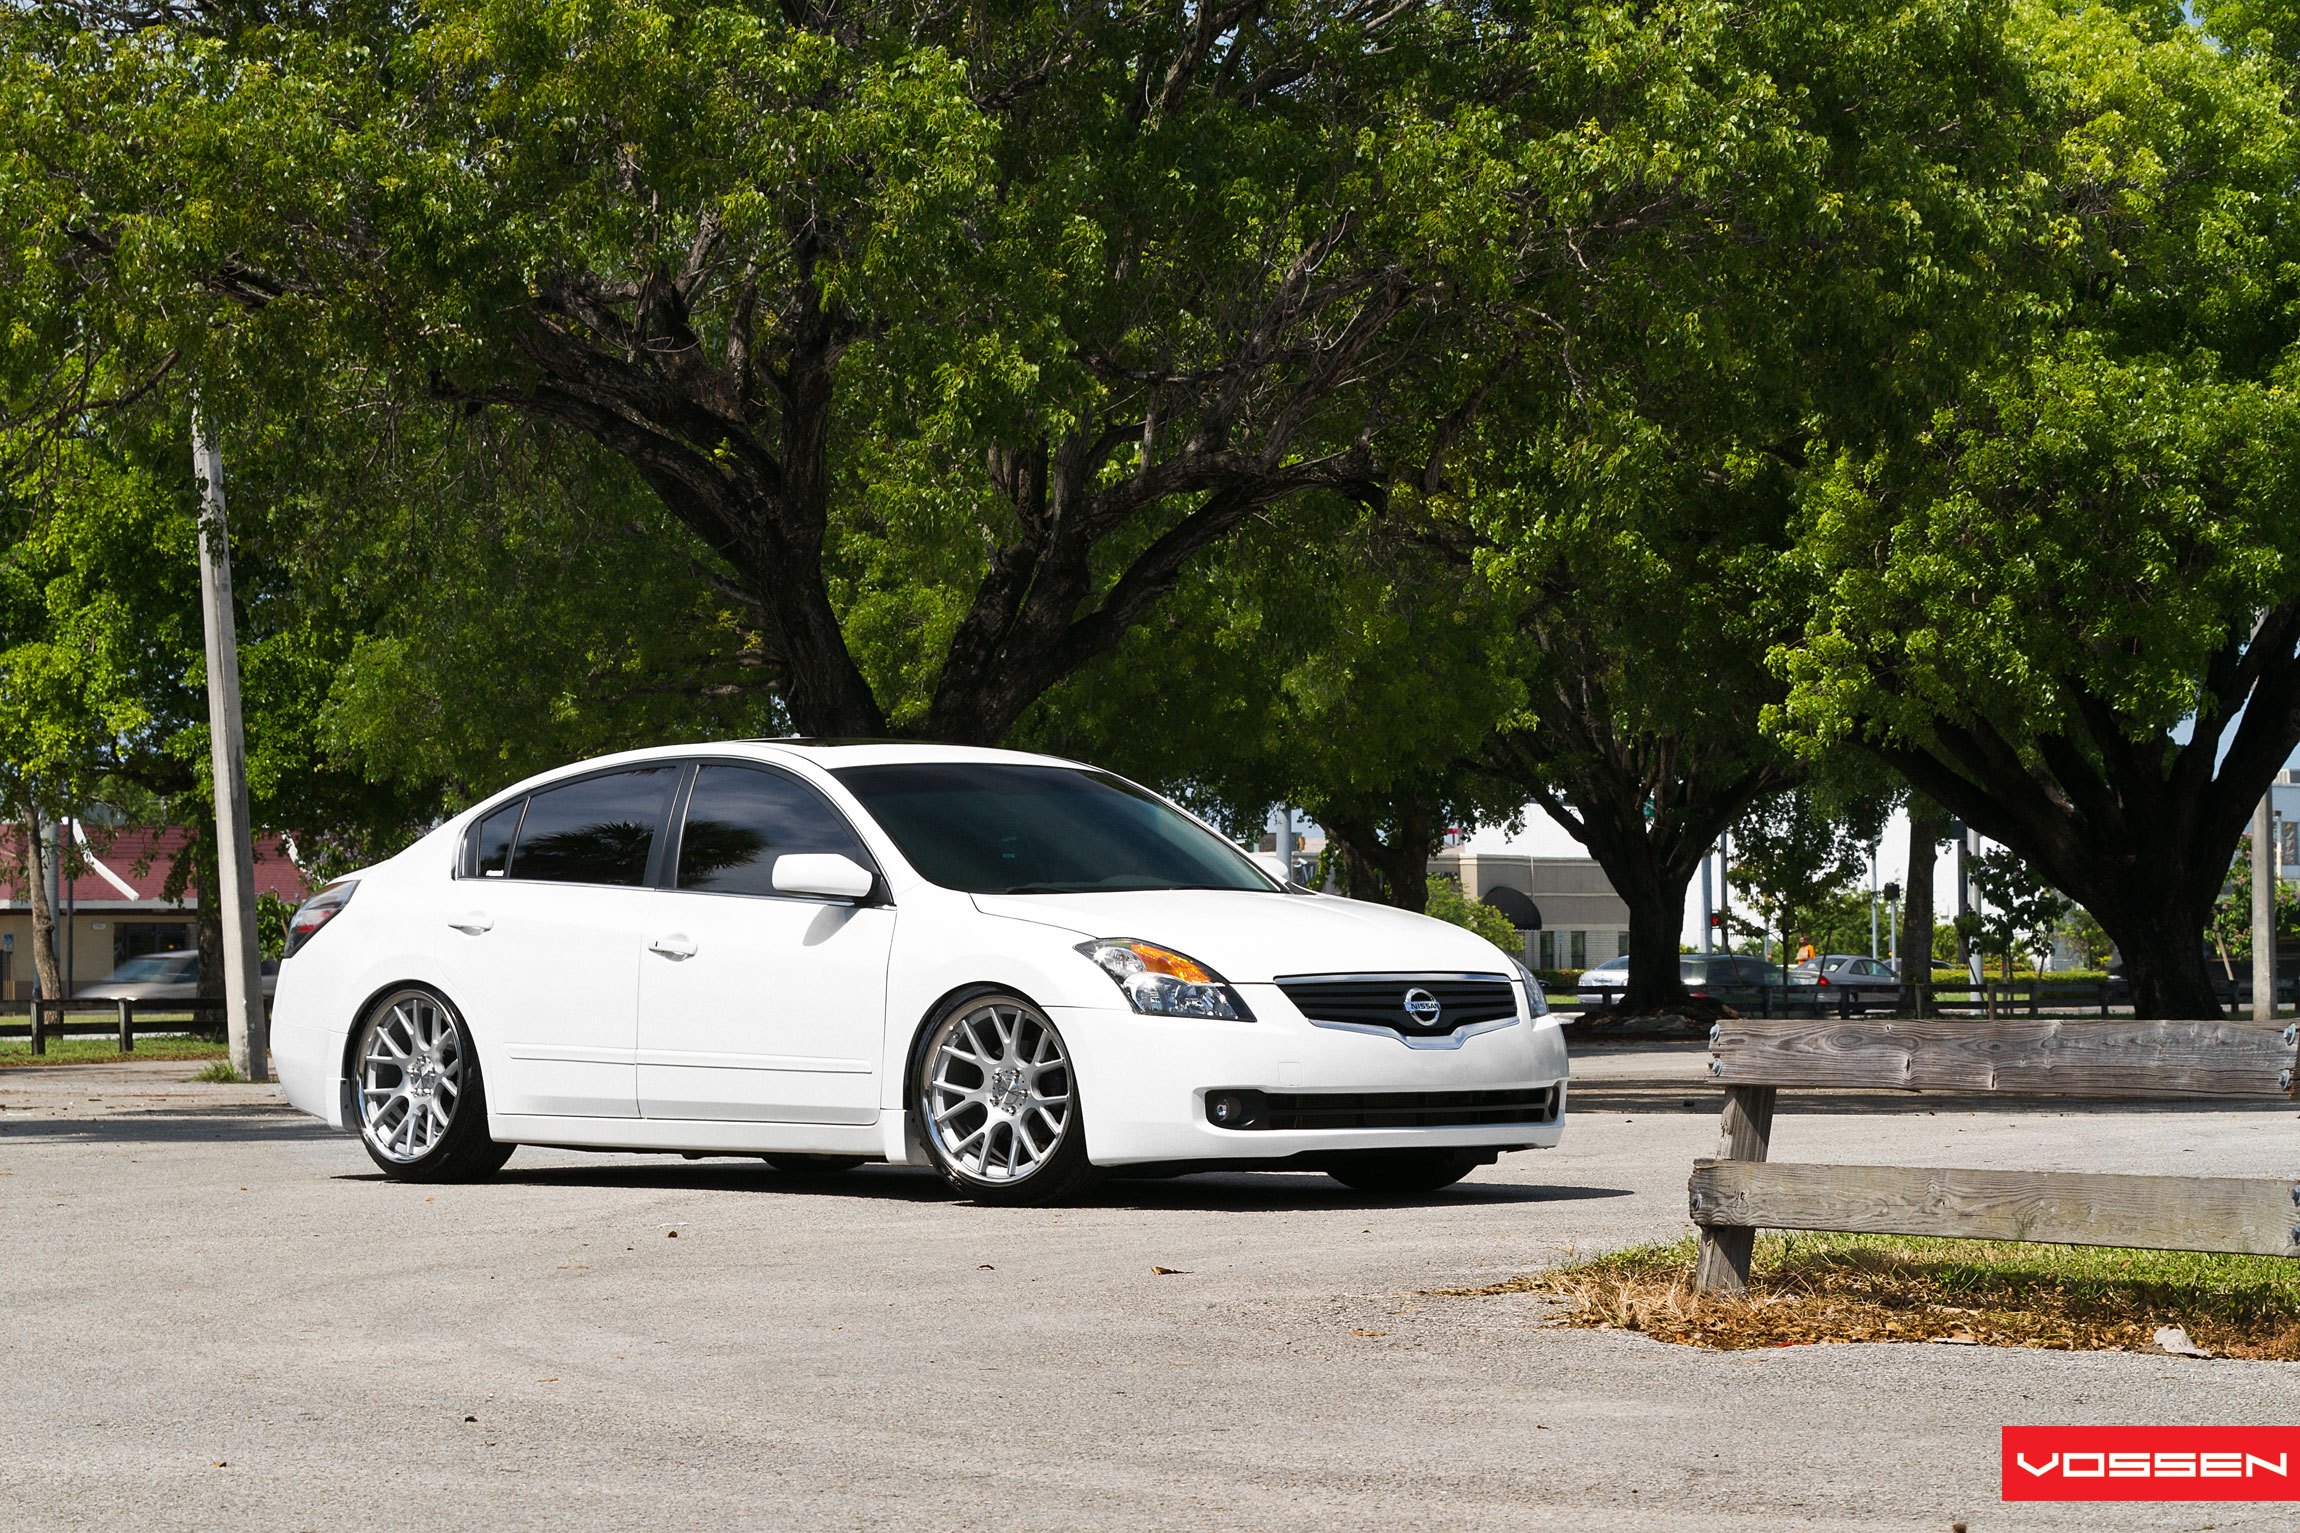 White Nissan Altima with Custom Grille - Photo by Vossen